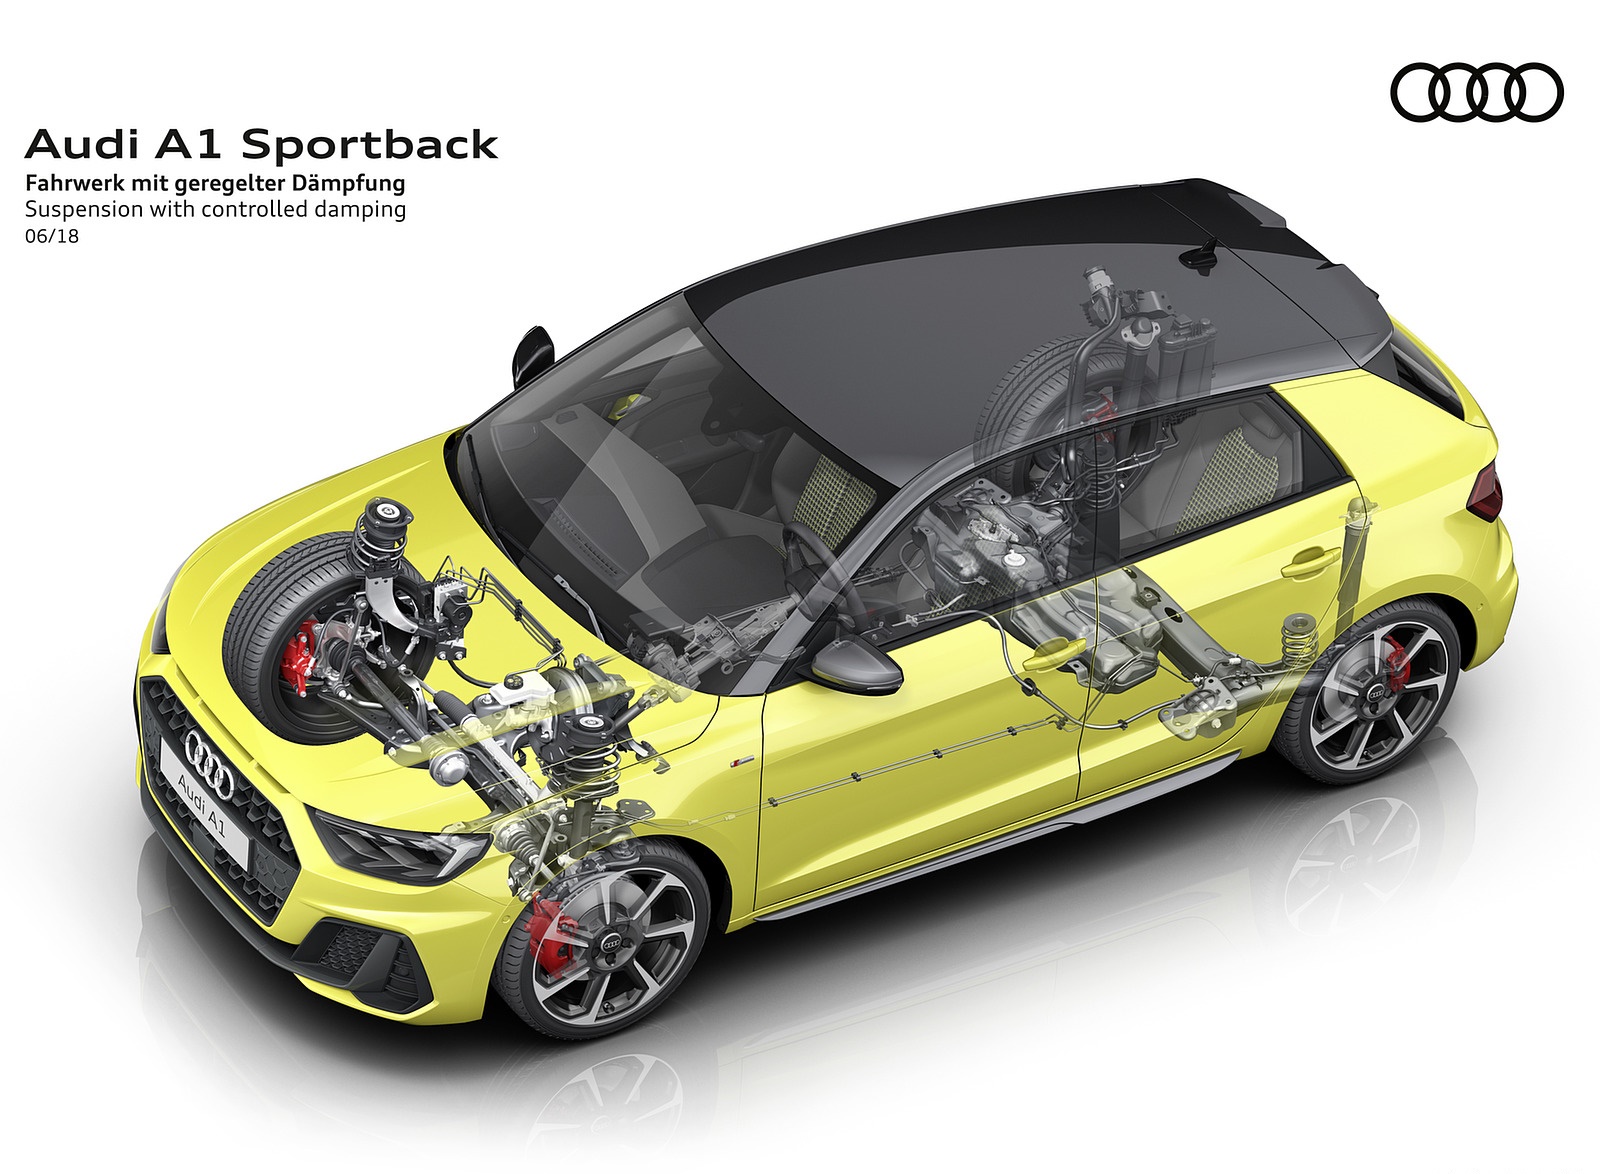 2019 Audi A1 Sportback Suspension with controlled damping Wallpapers #27 of 31